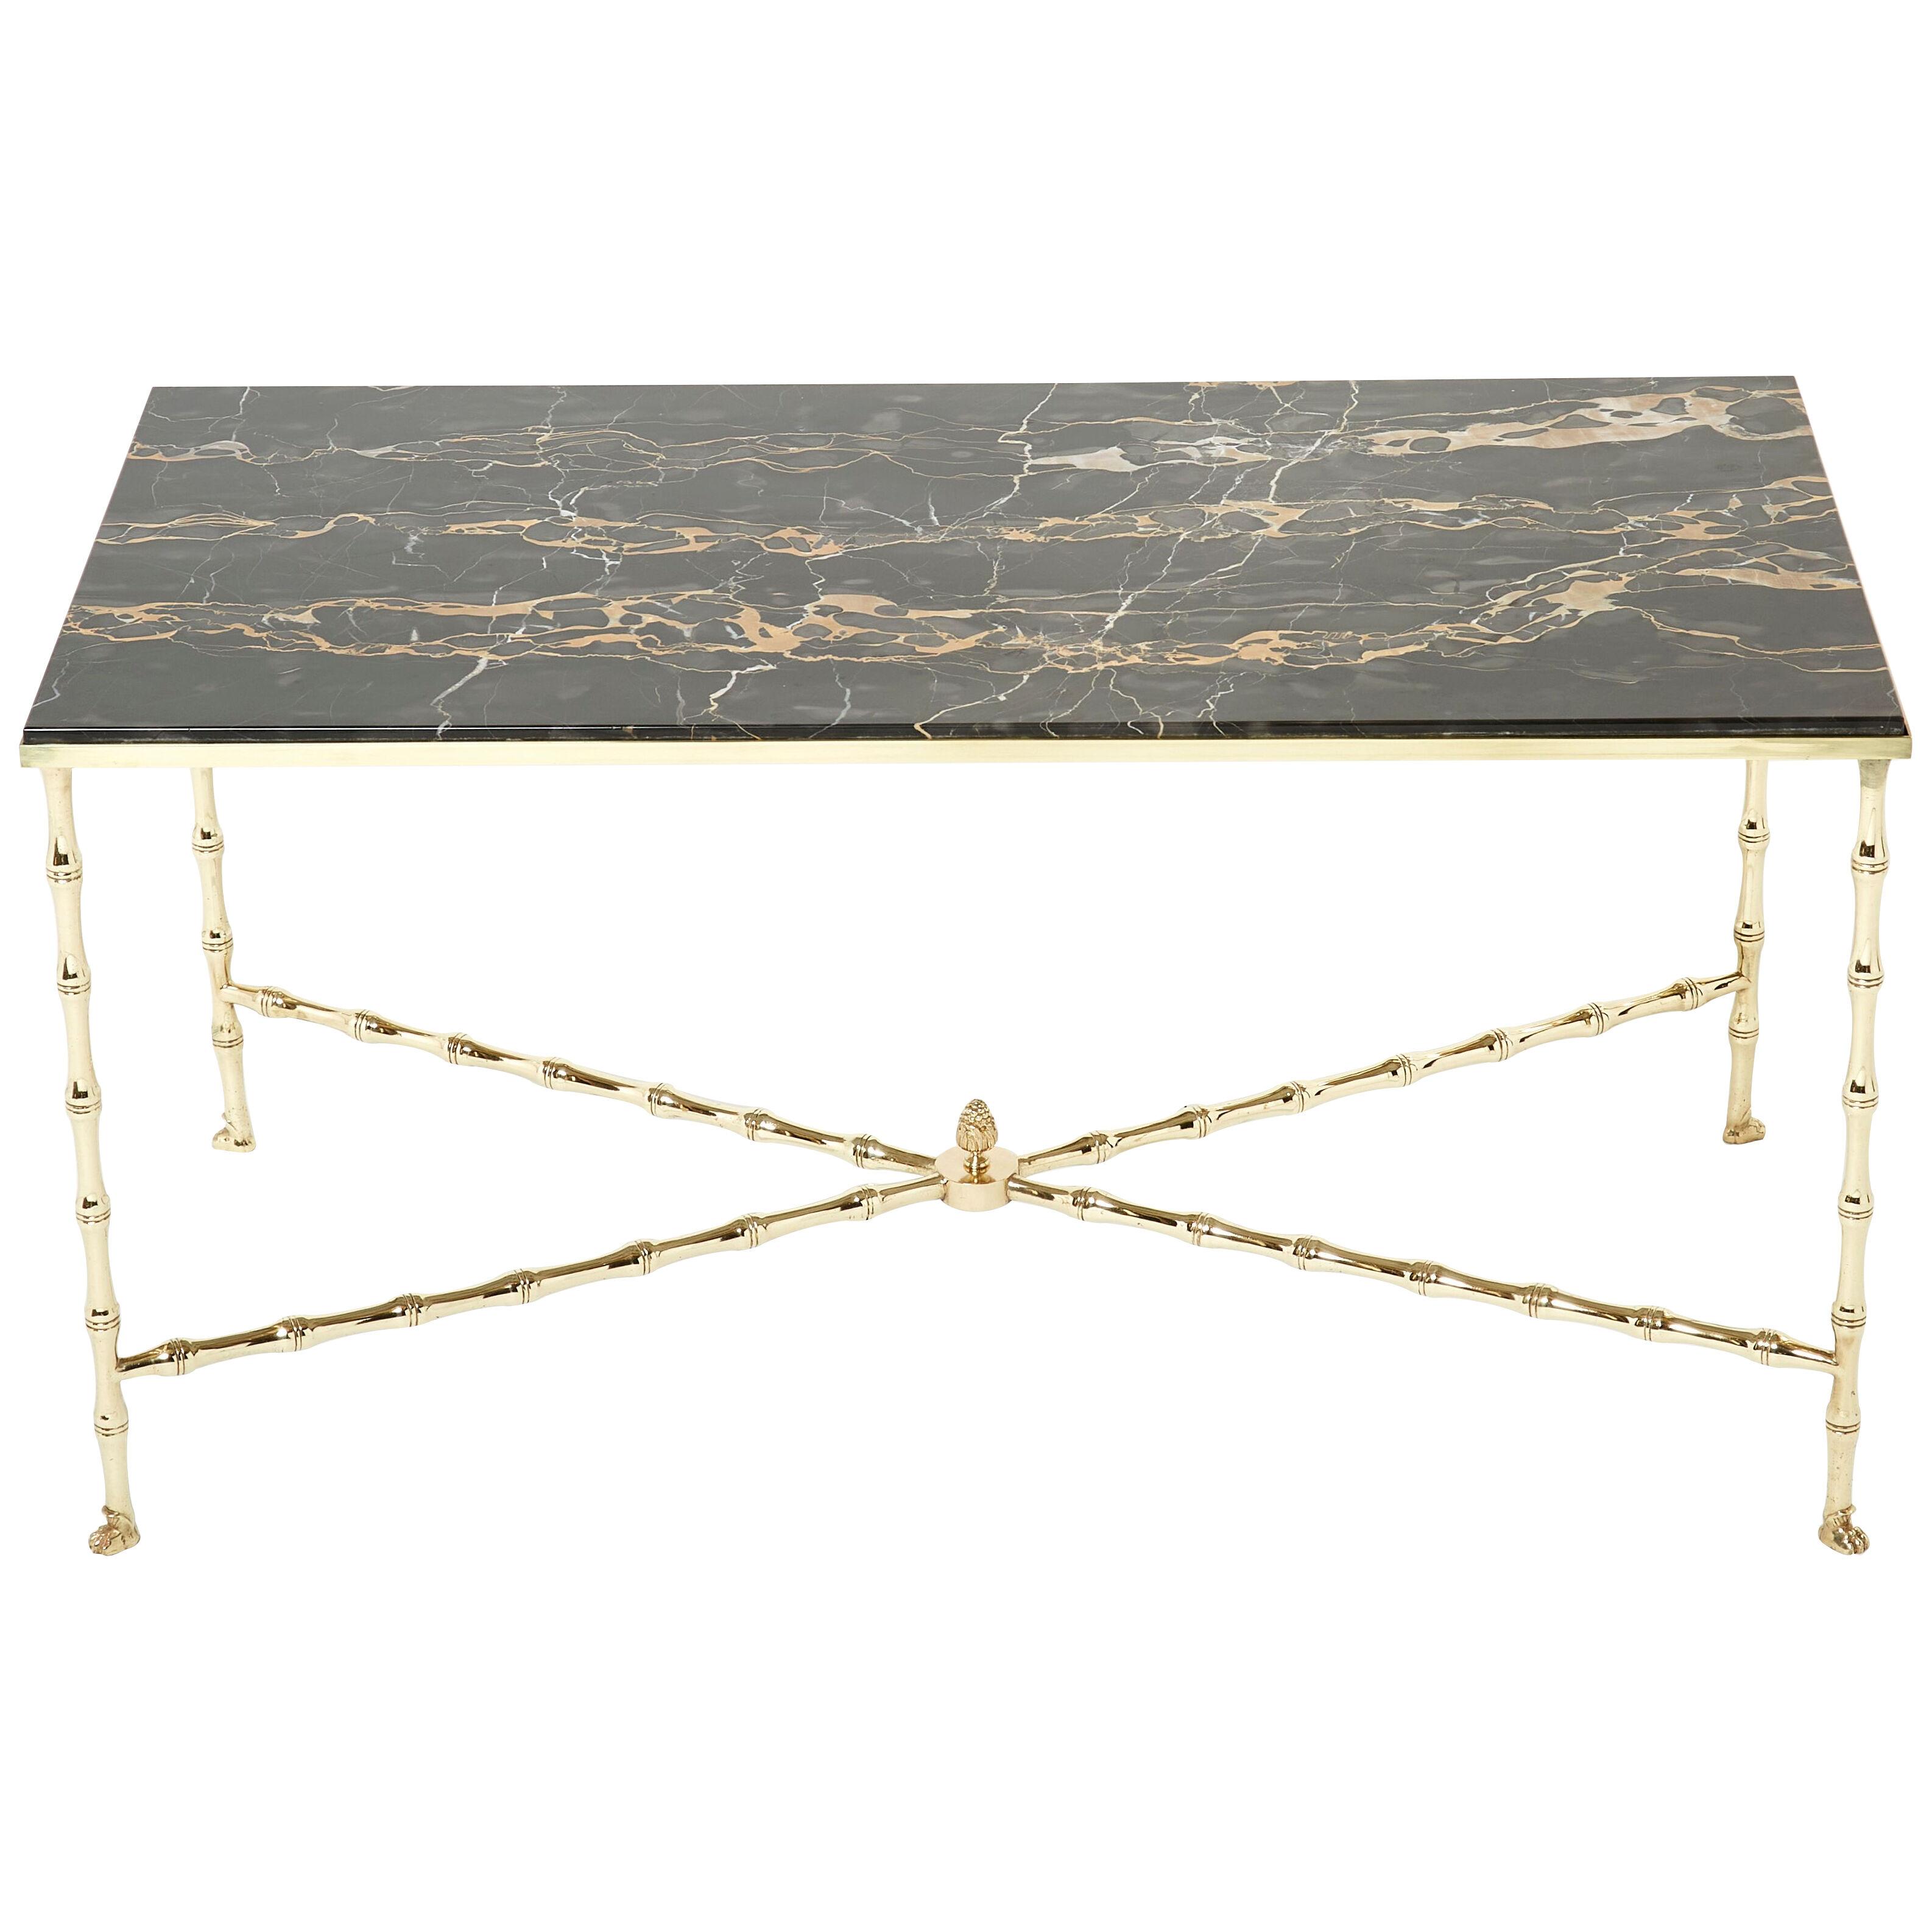 French Maison Jansen bamboo brass portor marble coffee table 1960s